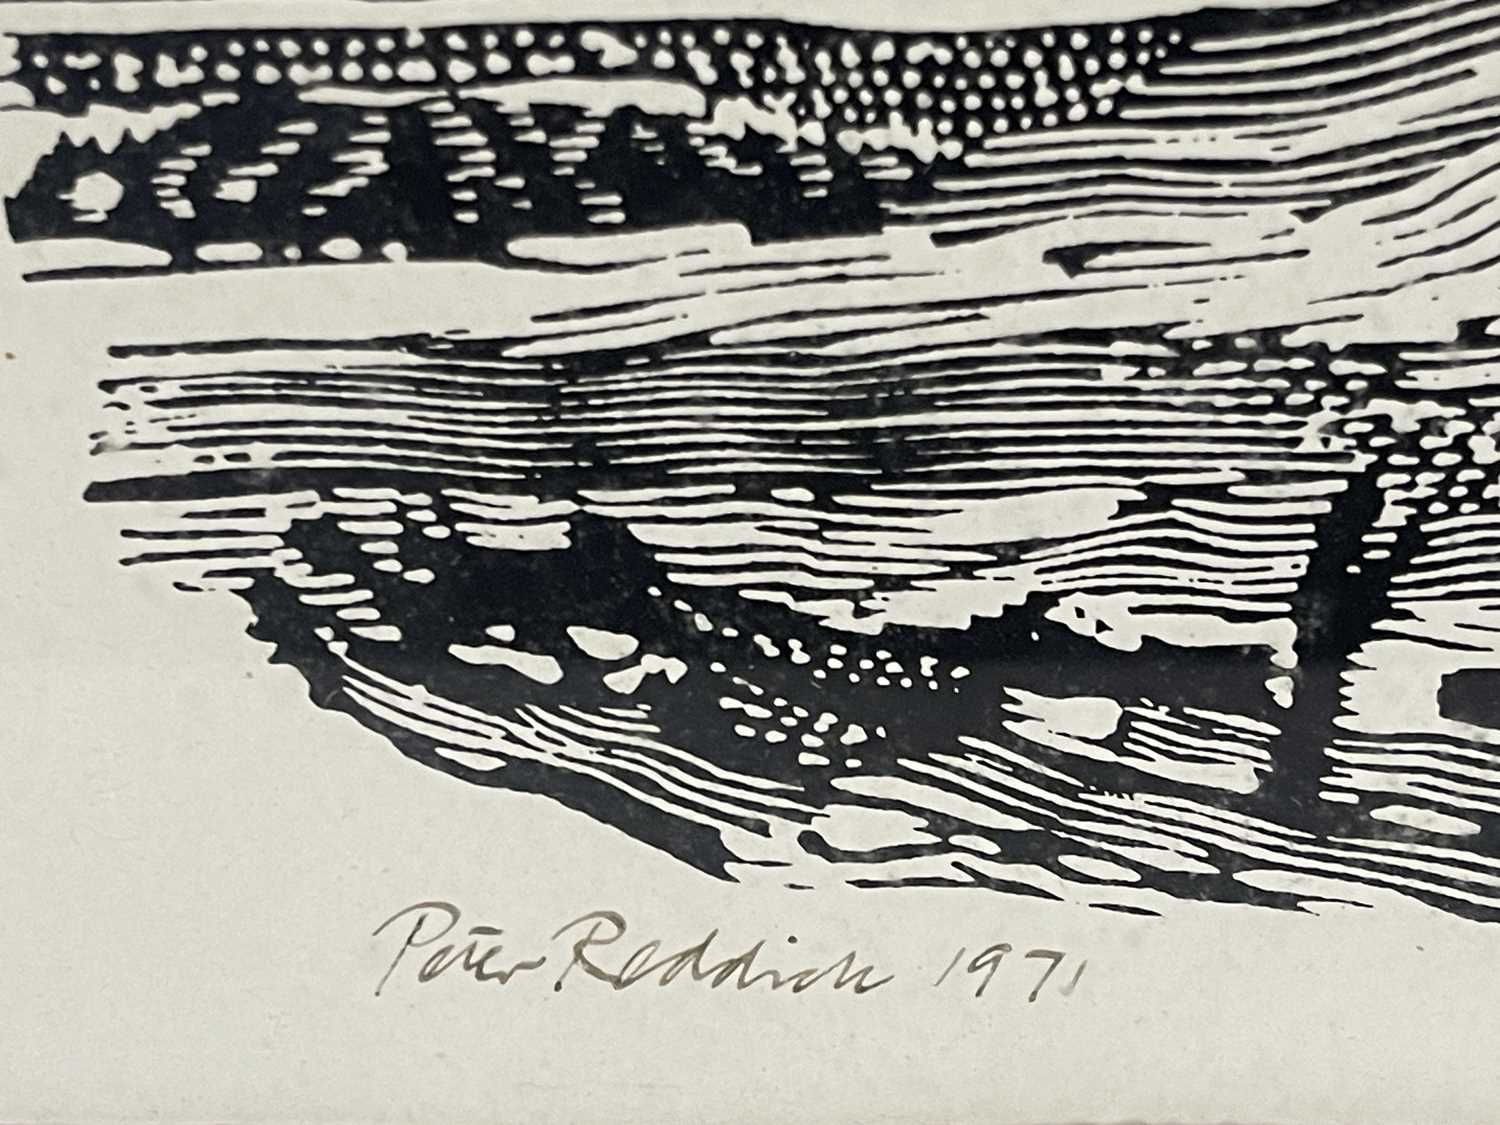 Peter Reddick (British, 1924-2010), landscape with trees, signed and dated 1971 l.l., woodcut, - Image 2 of 7